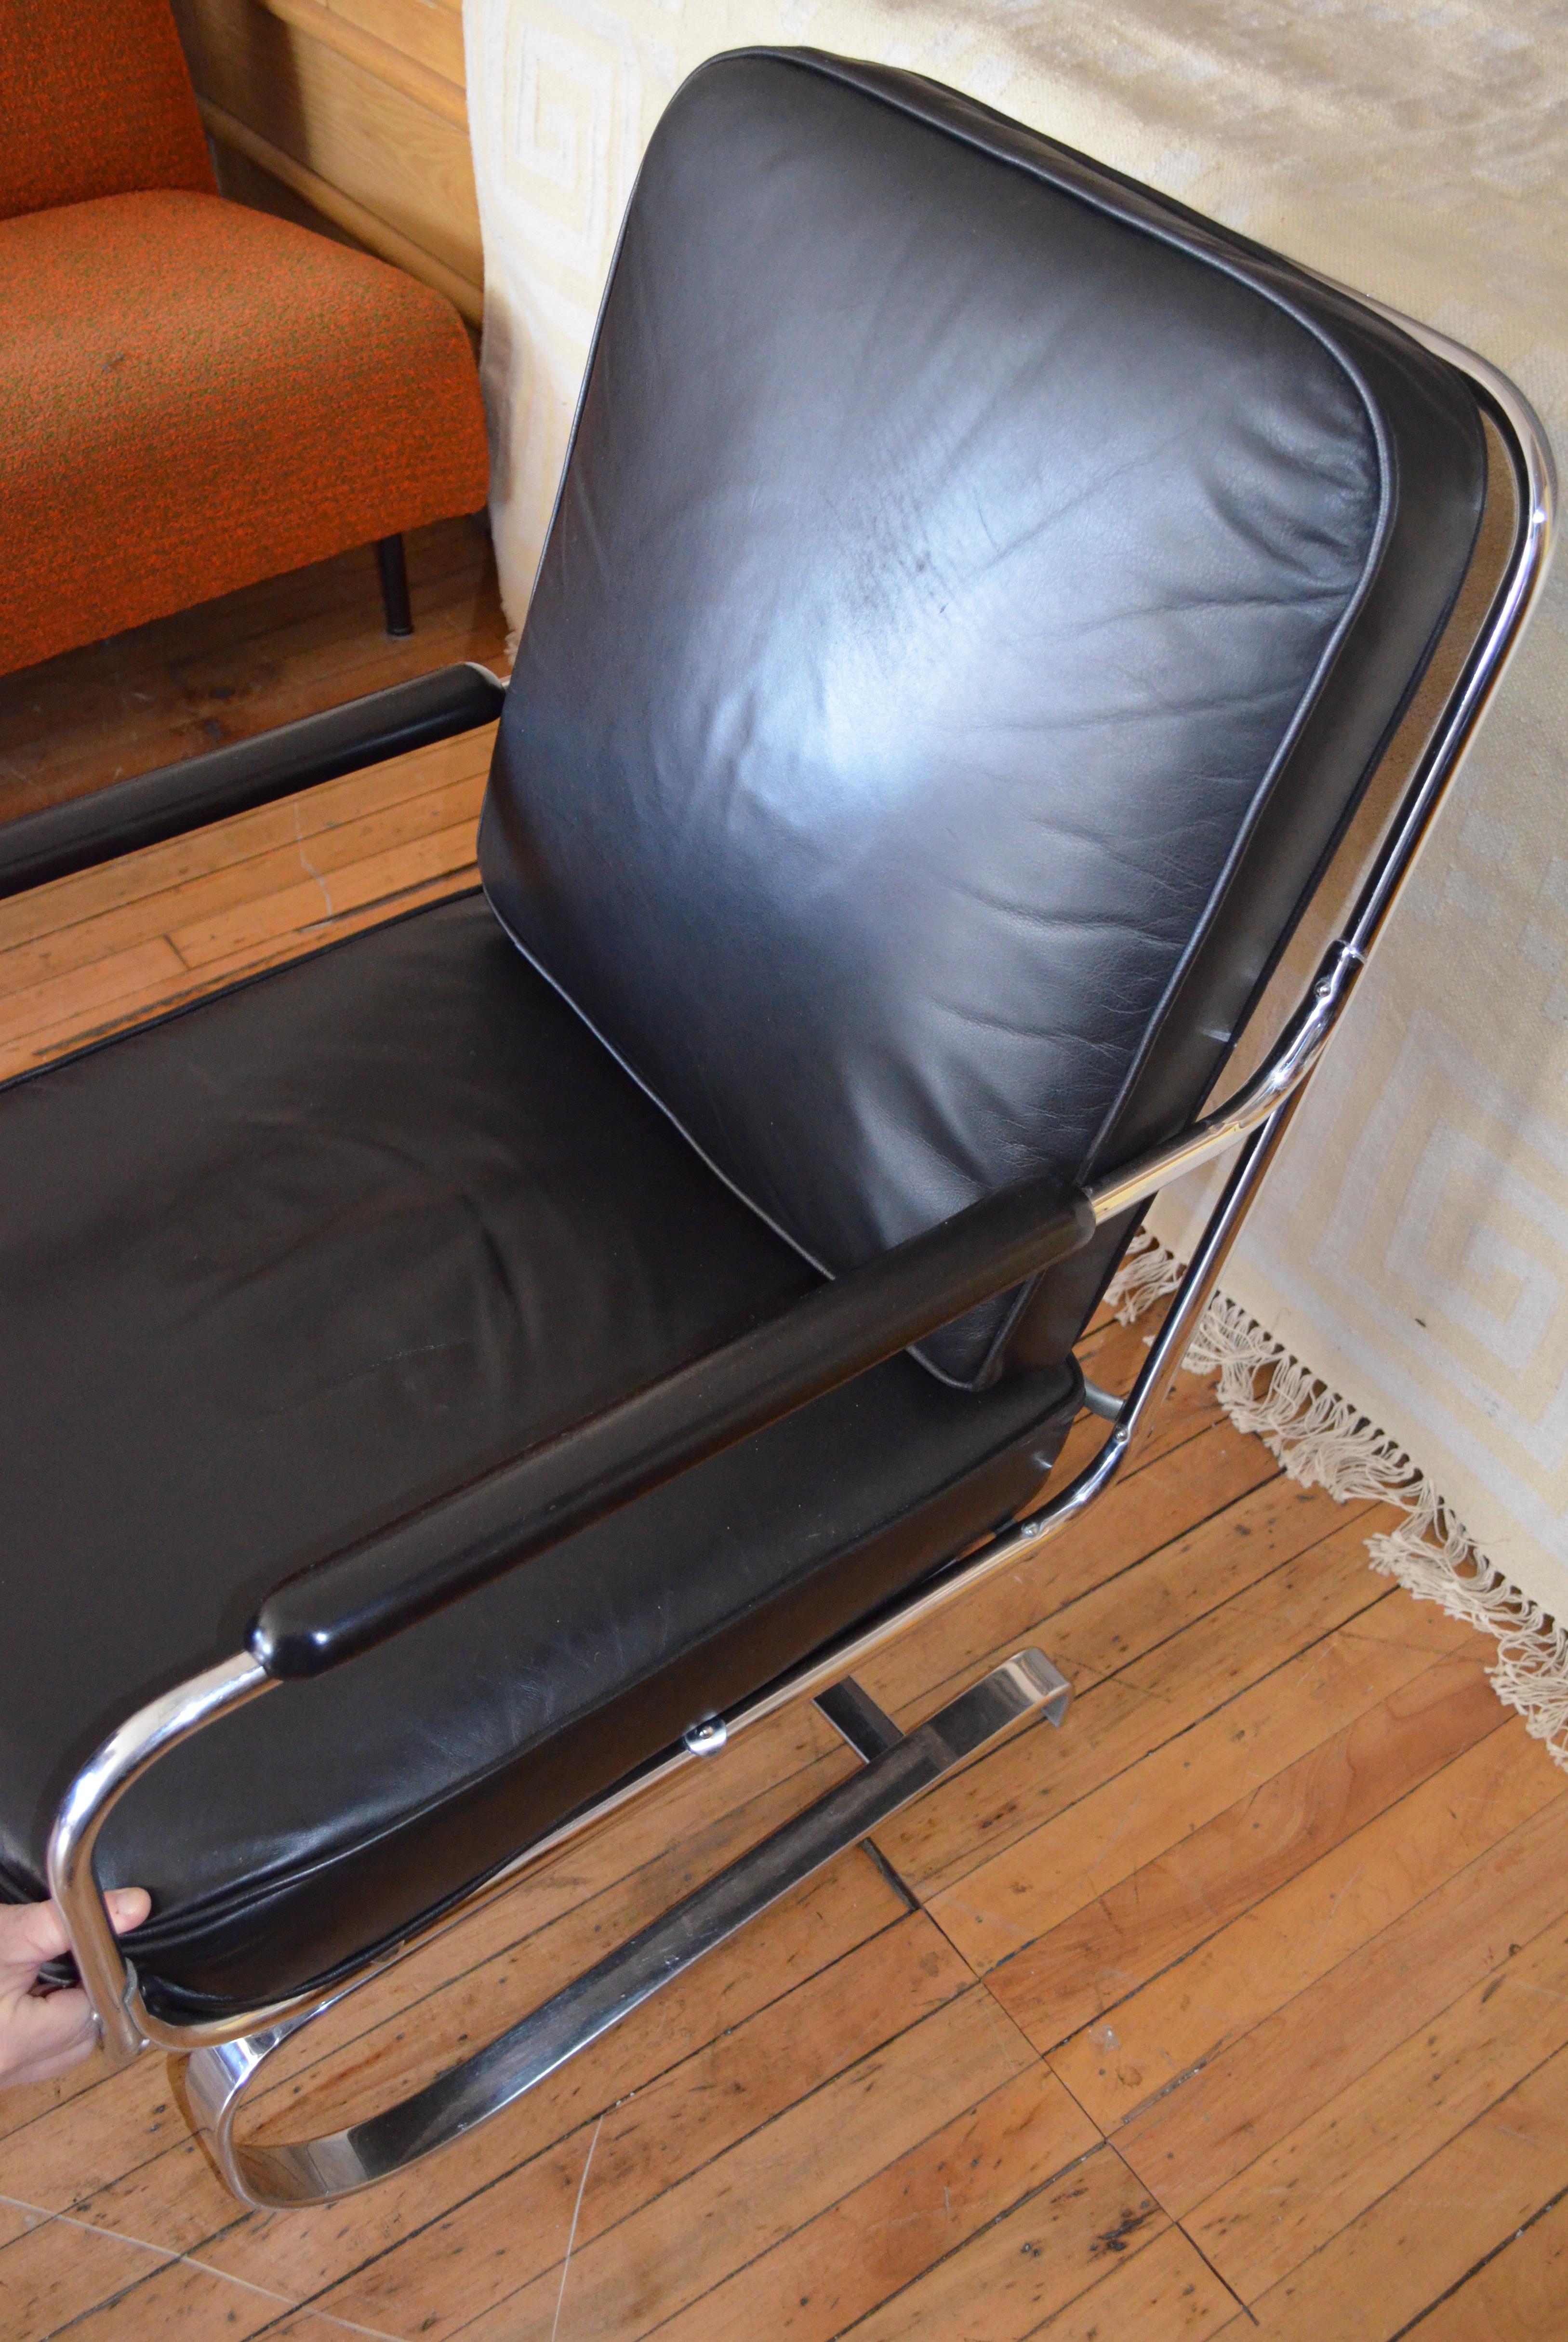 Springer Armchair Black Leather by KEM Weber for Lloyd Mfg, Bauhaus, Deco, 1935 In Good Condition For Sale In Madison, WI